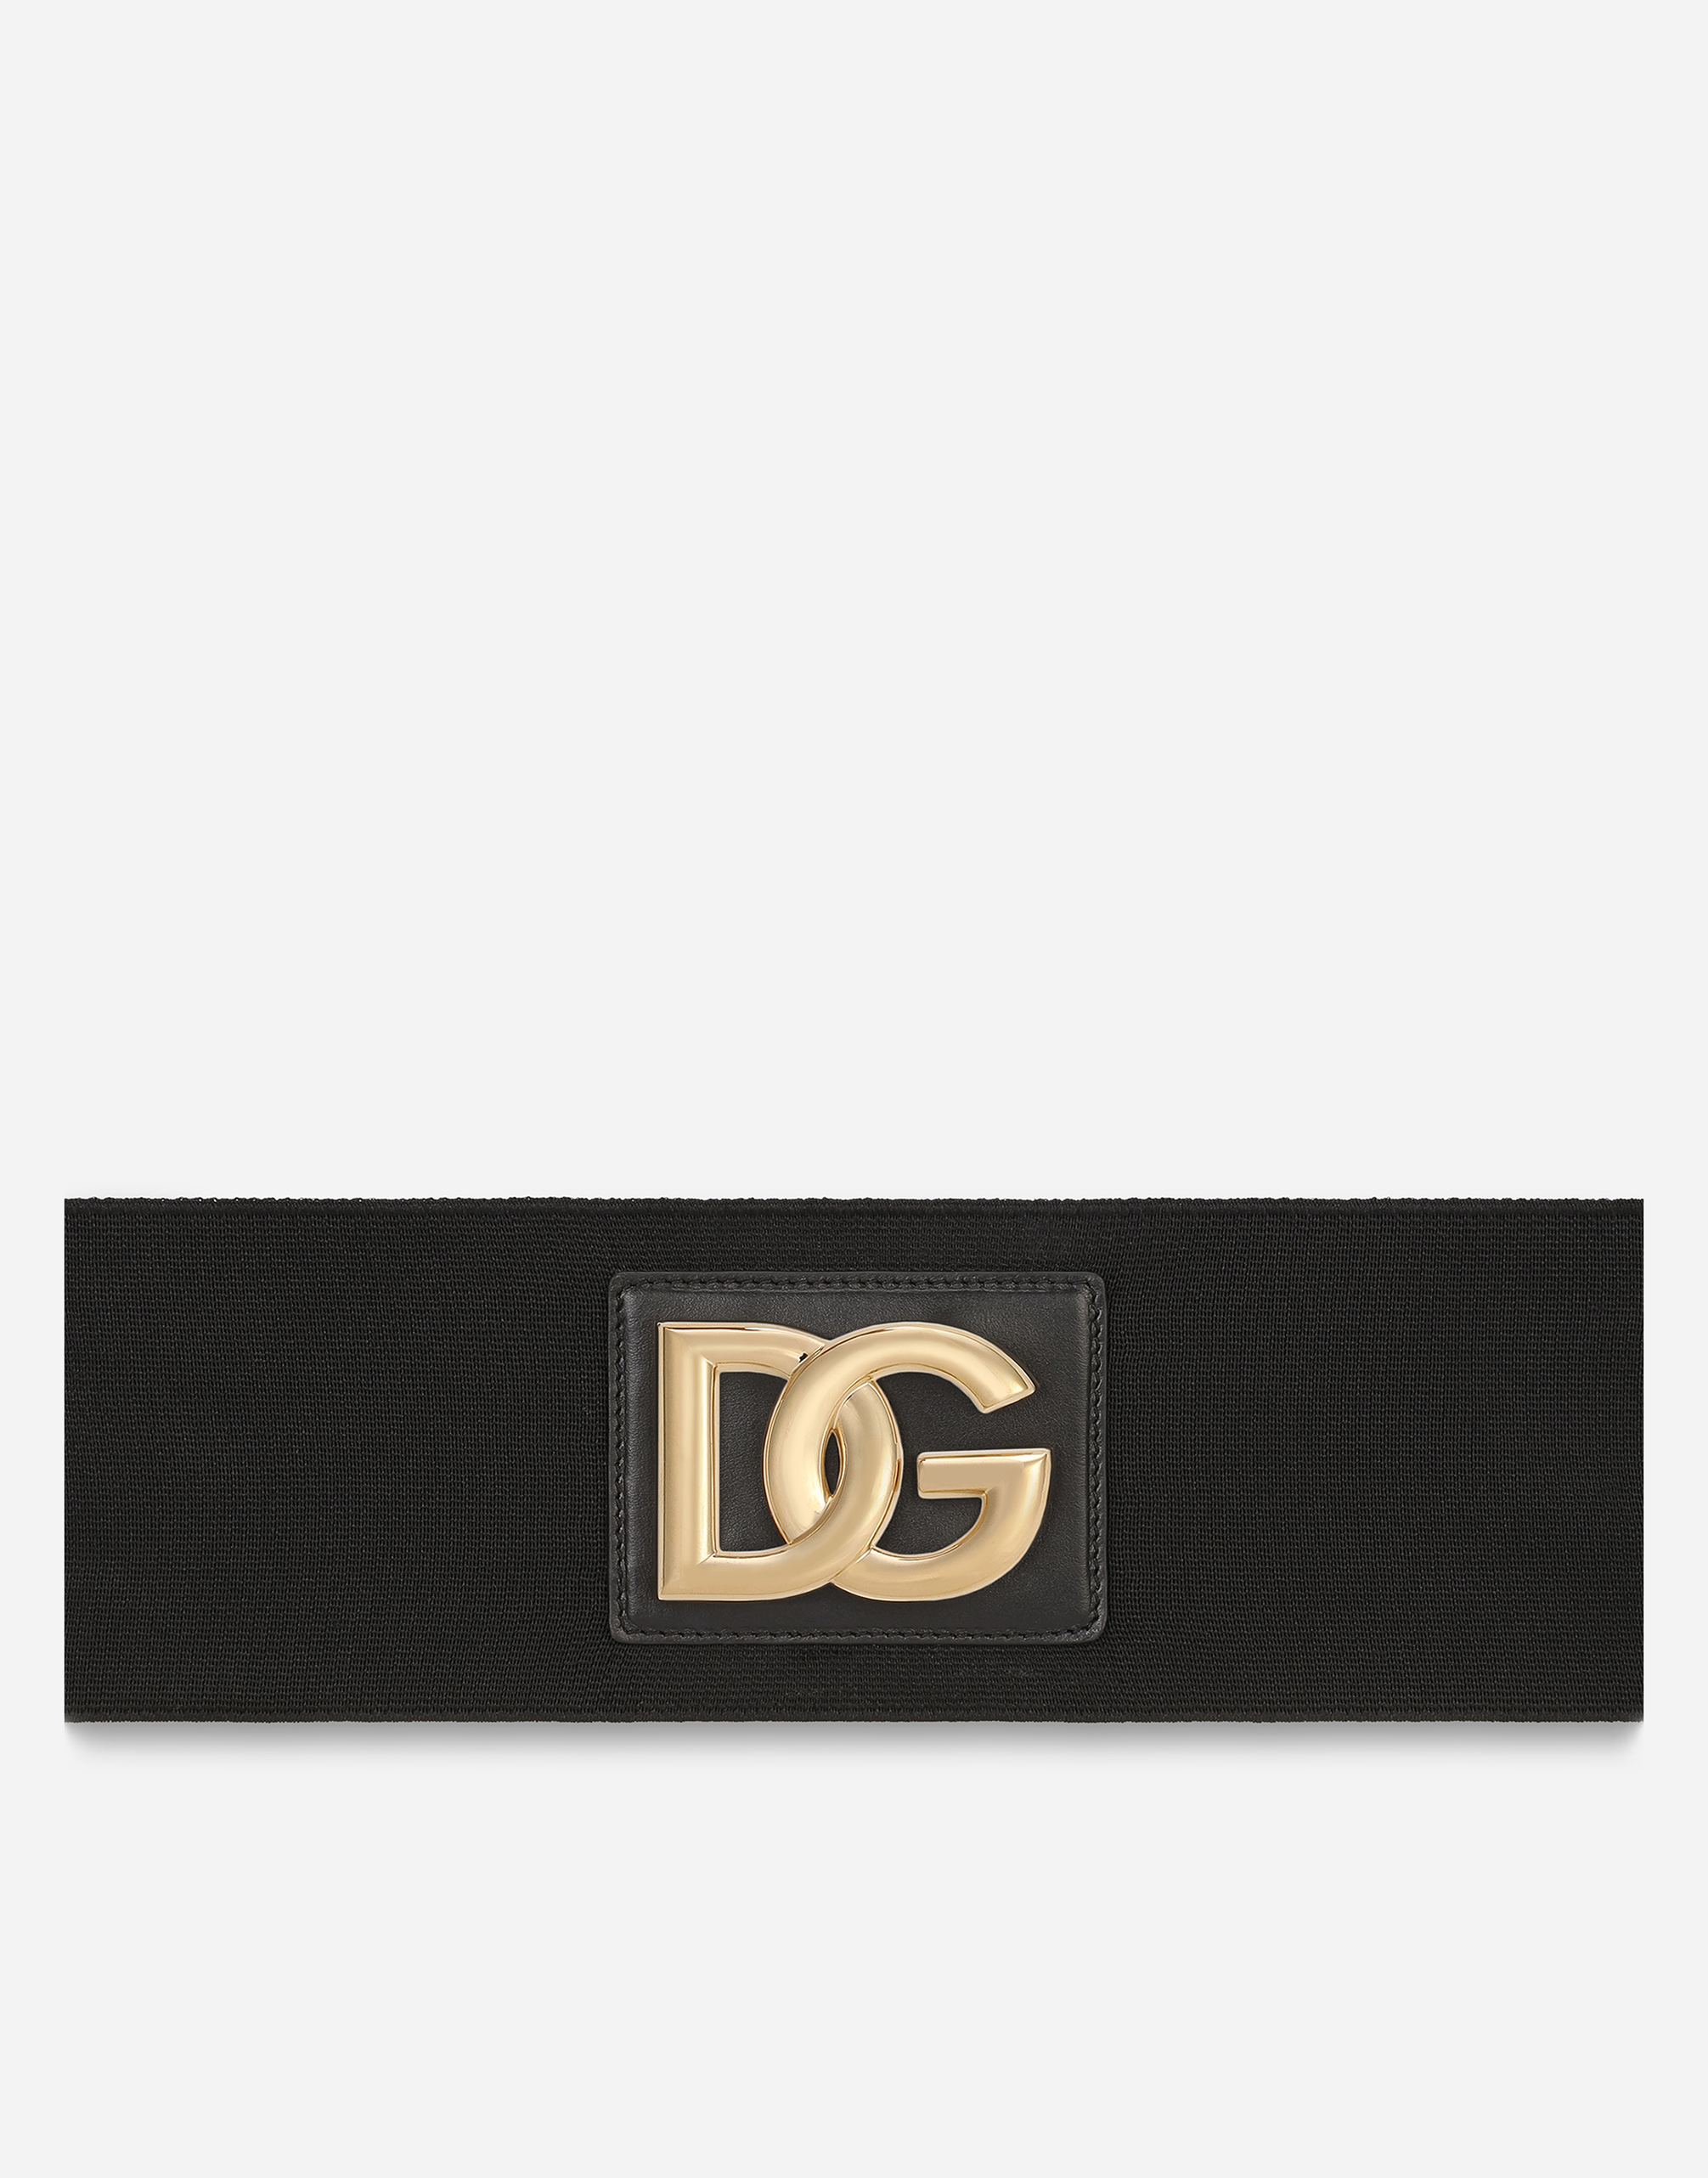 Stretch band belt with DG logo in Black